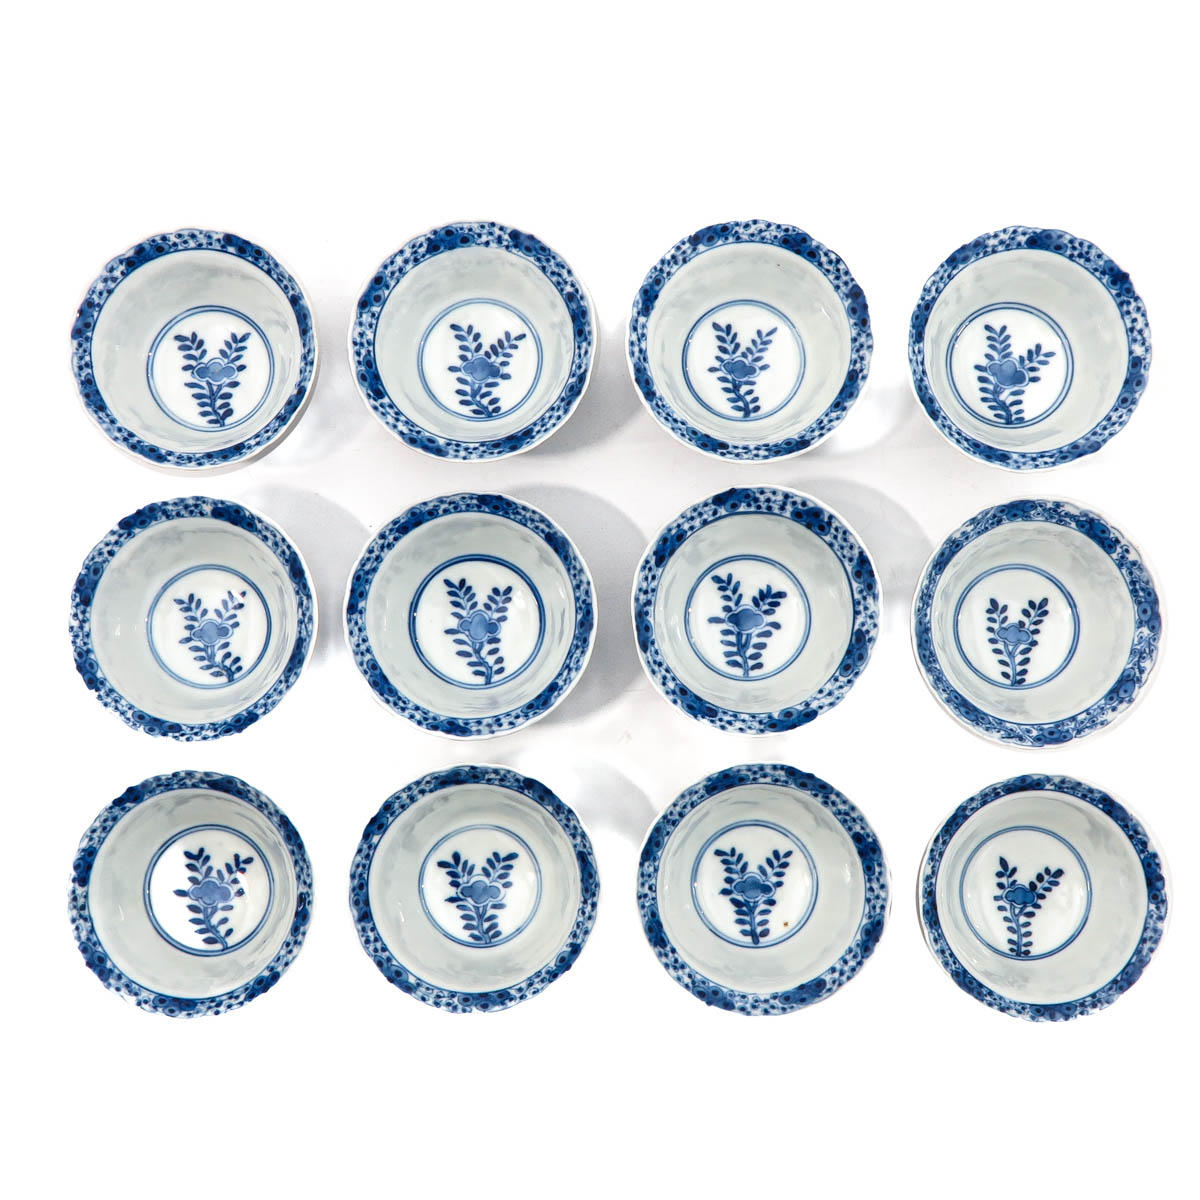 A Collection of 12 Cups and Saucers - Image 5 of 10